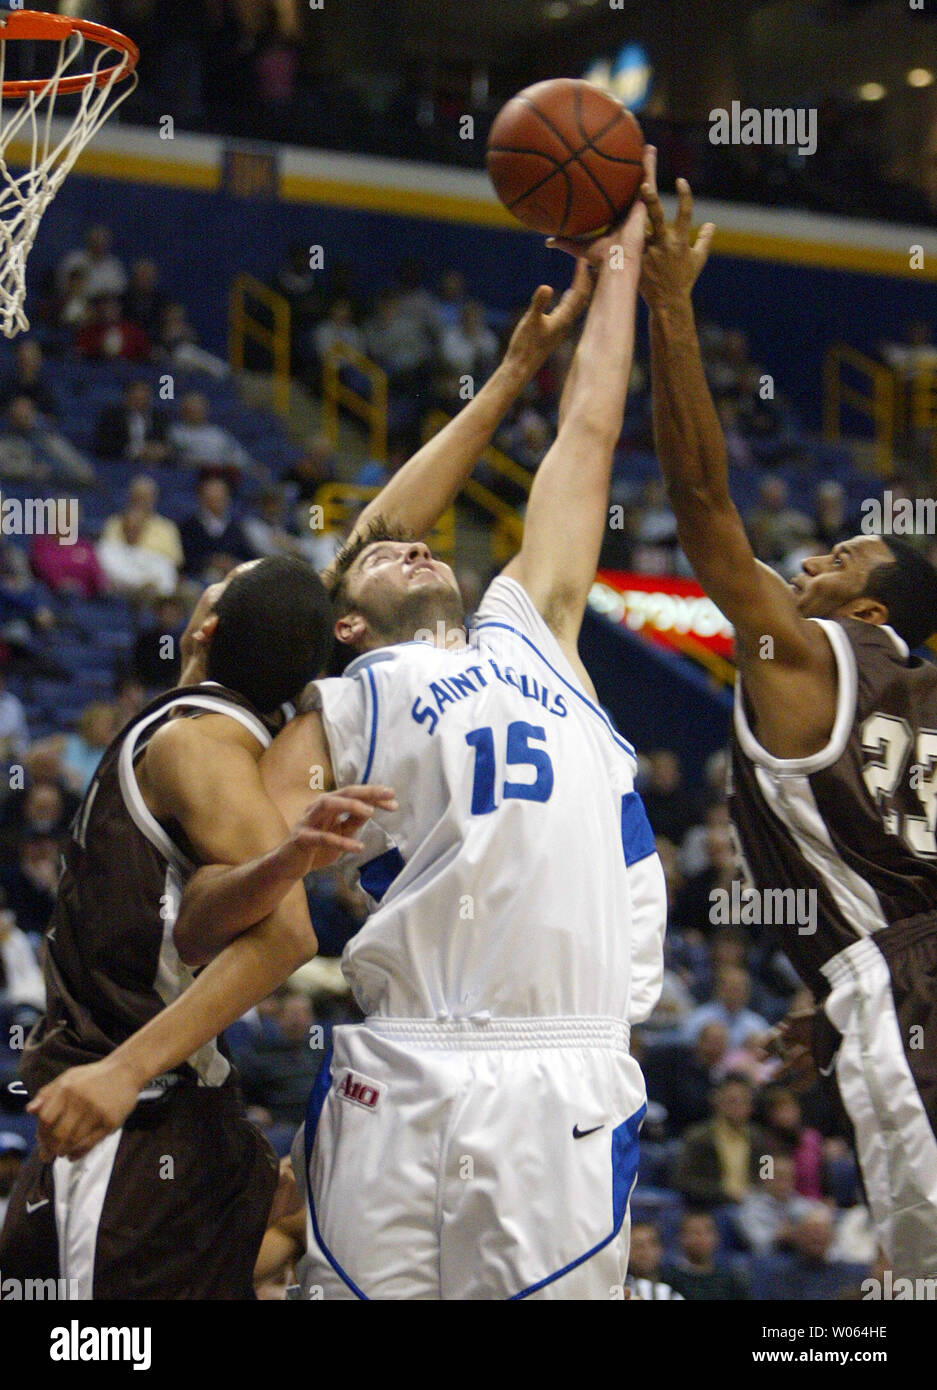 Saint Louis University Billikens Ian Vouyoukas (15) battles St. Bonaventure Bonnies' Paul Williams (L) and Wade Dunston (R) for the rebound in the first half at the Savvis Center in St. Louis on January 3, 2006. (UPI Photo/Bill Greenblatt) Stock Photo